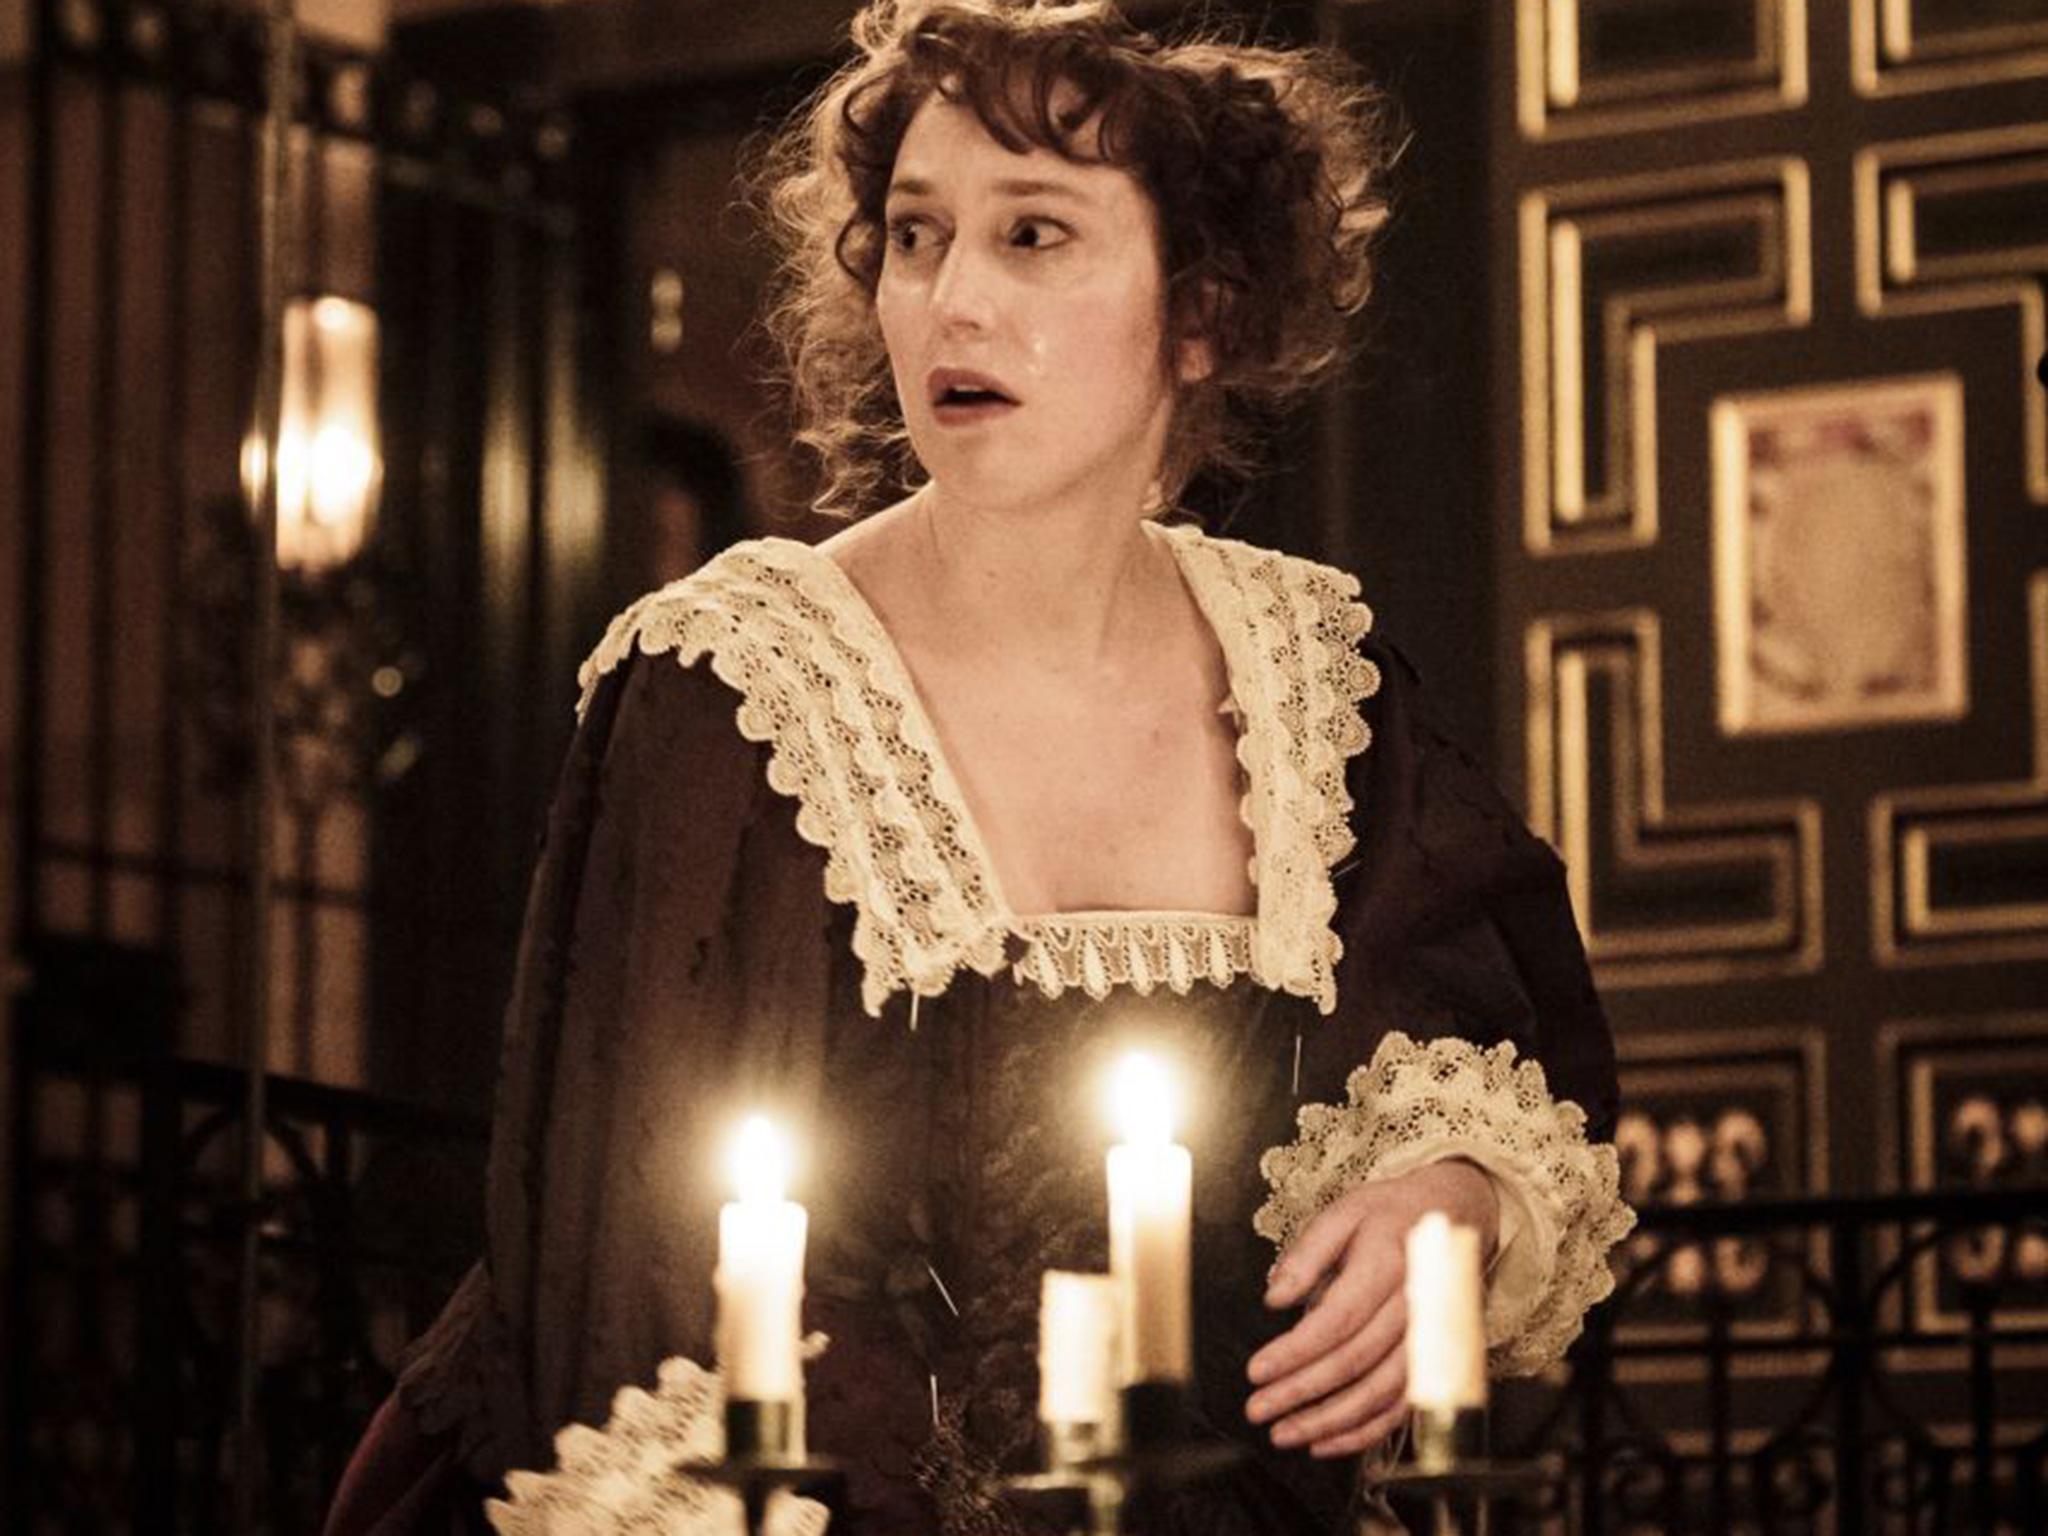 The Changeling, Sam Wanamaker Playhouse, review Morahan shines but not